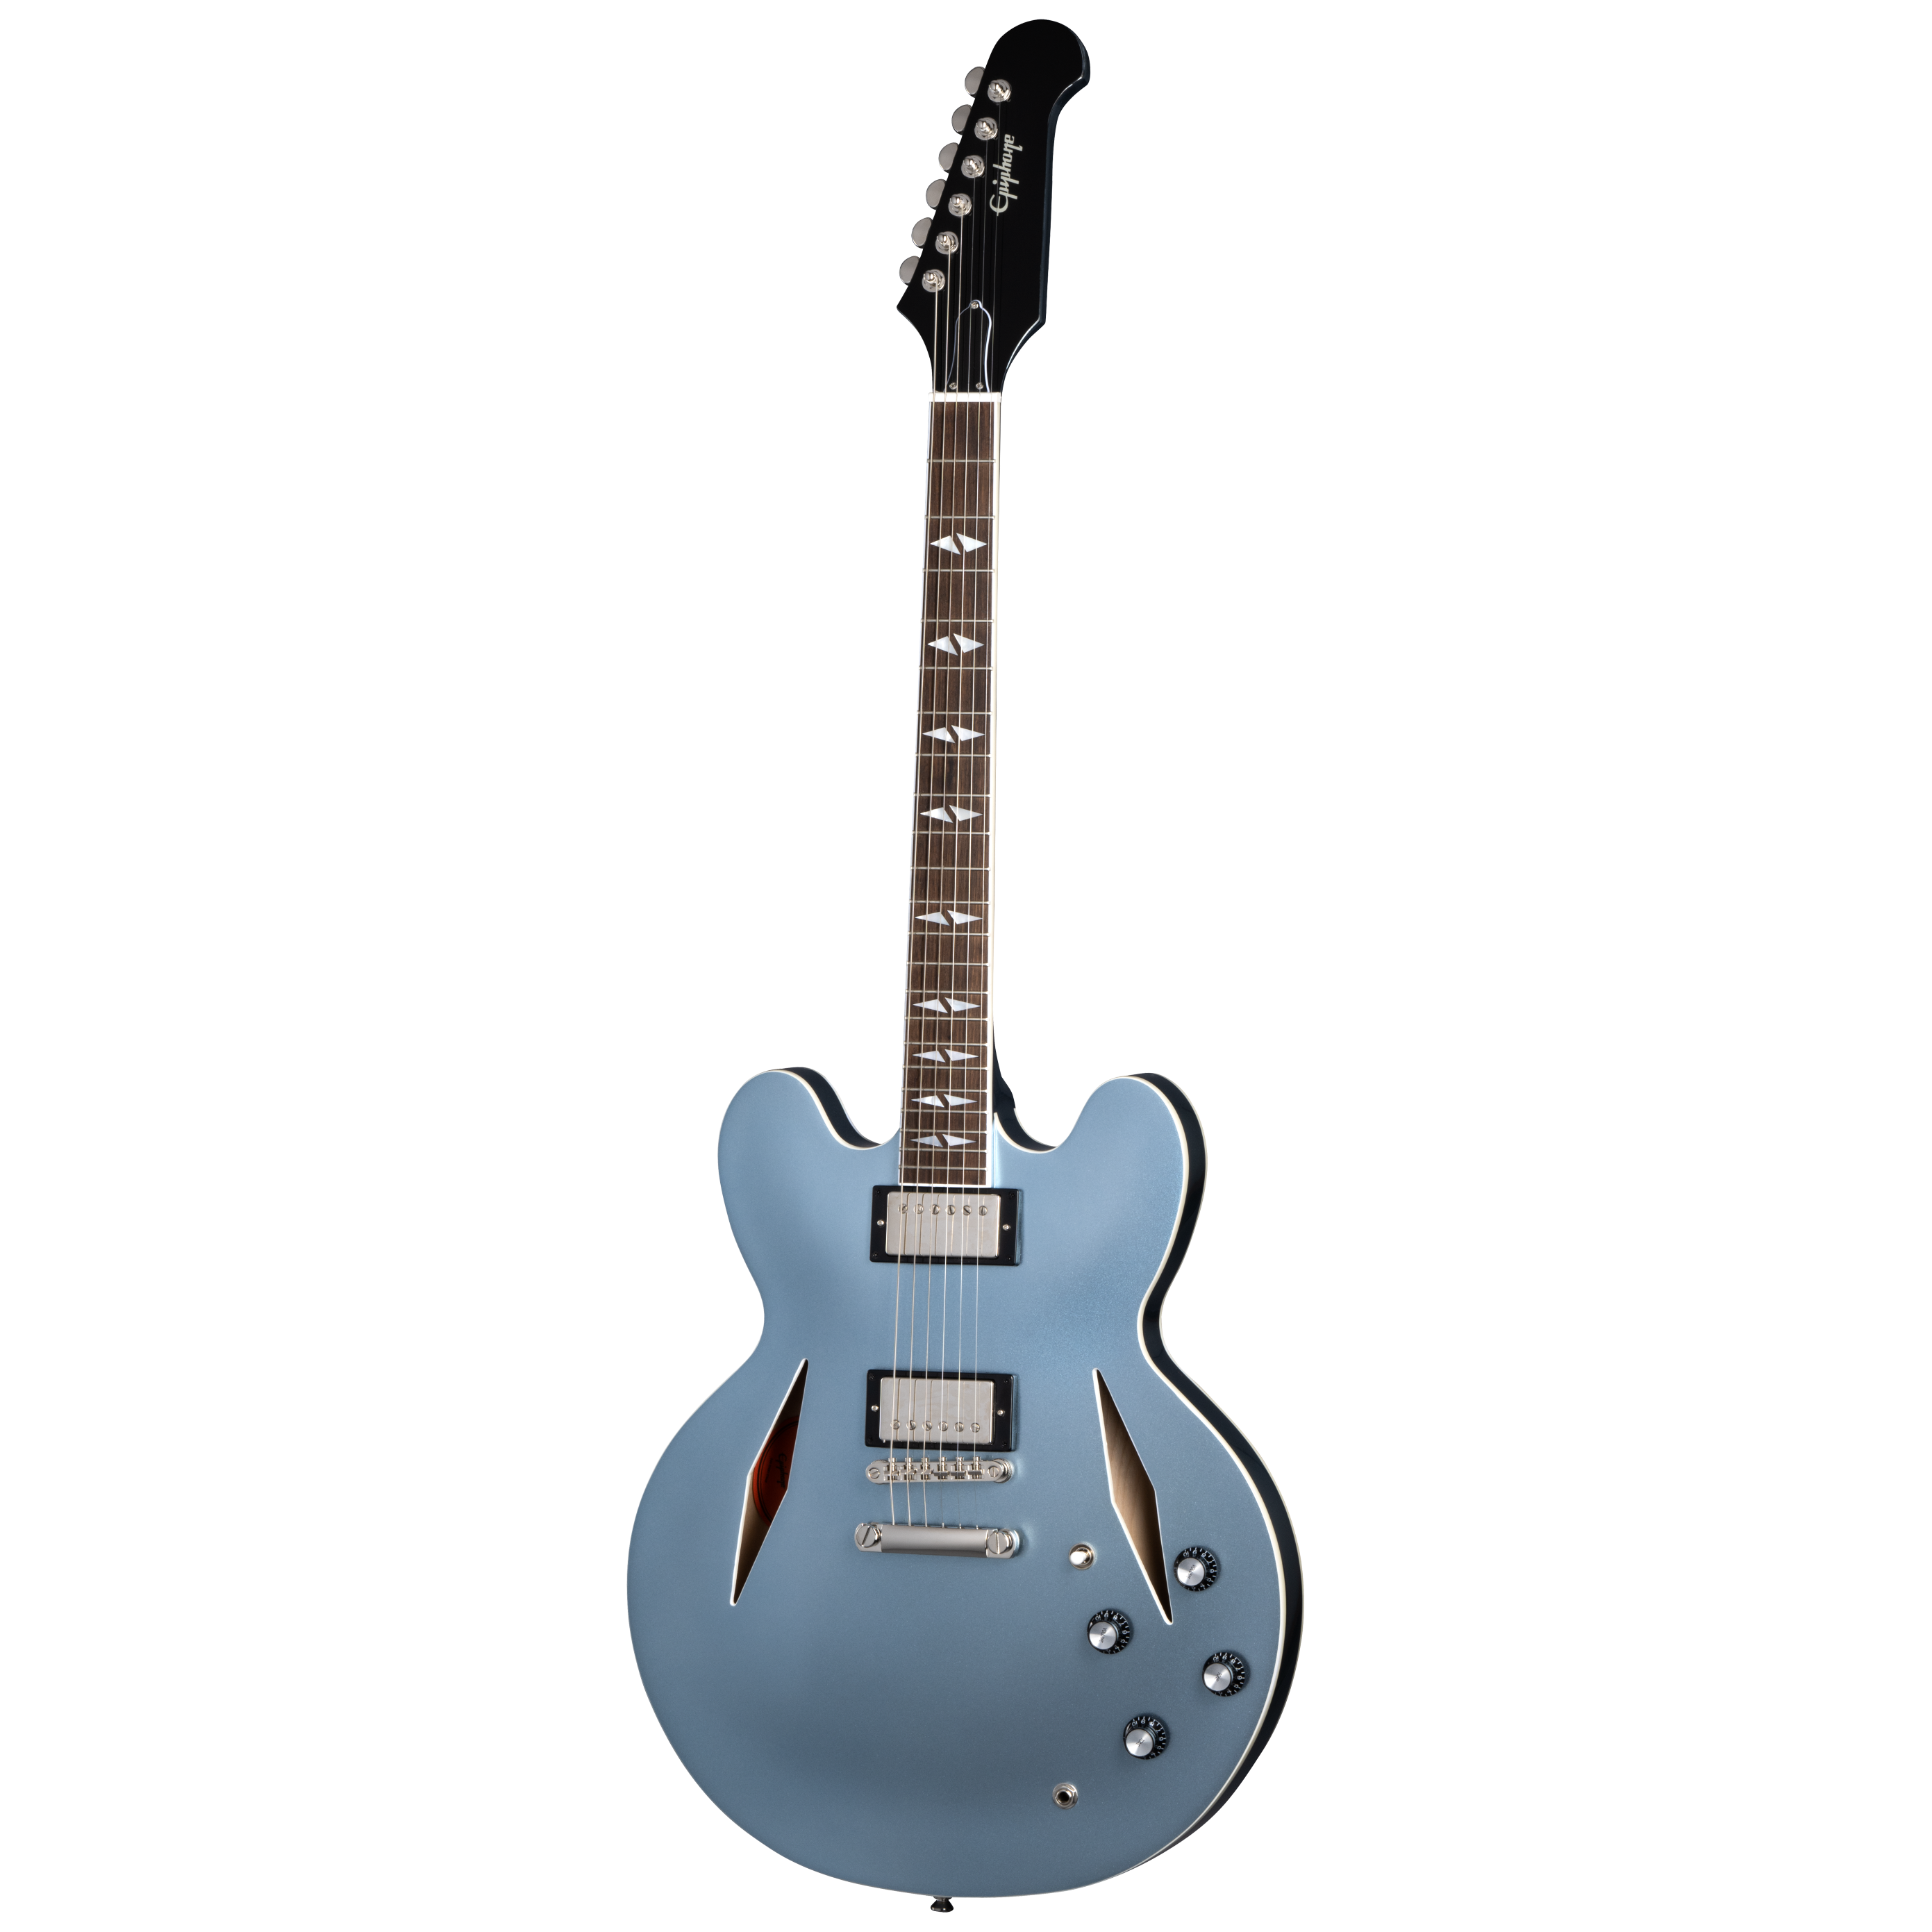 Epiphone Dave Grohl DG-335